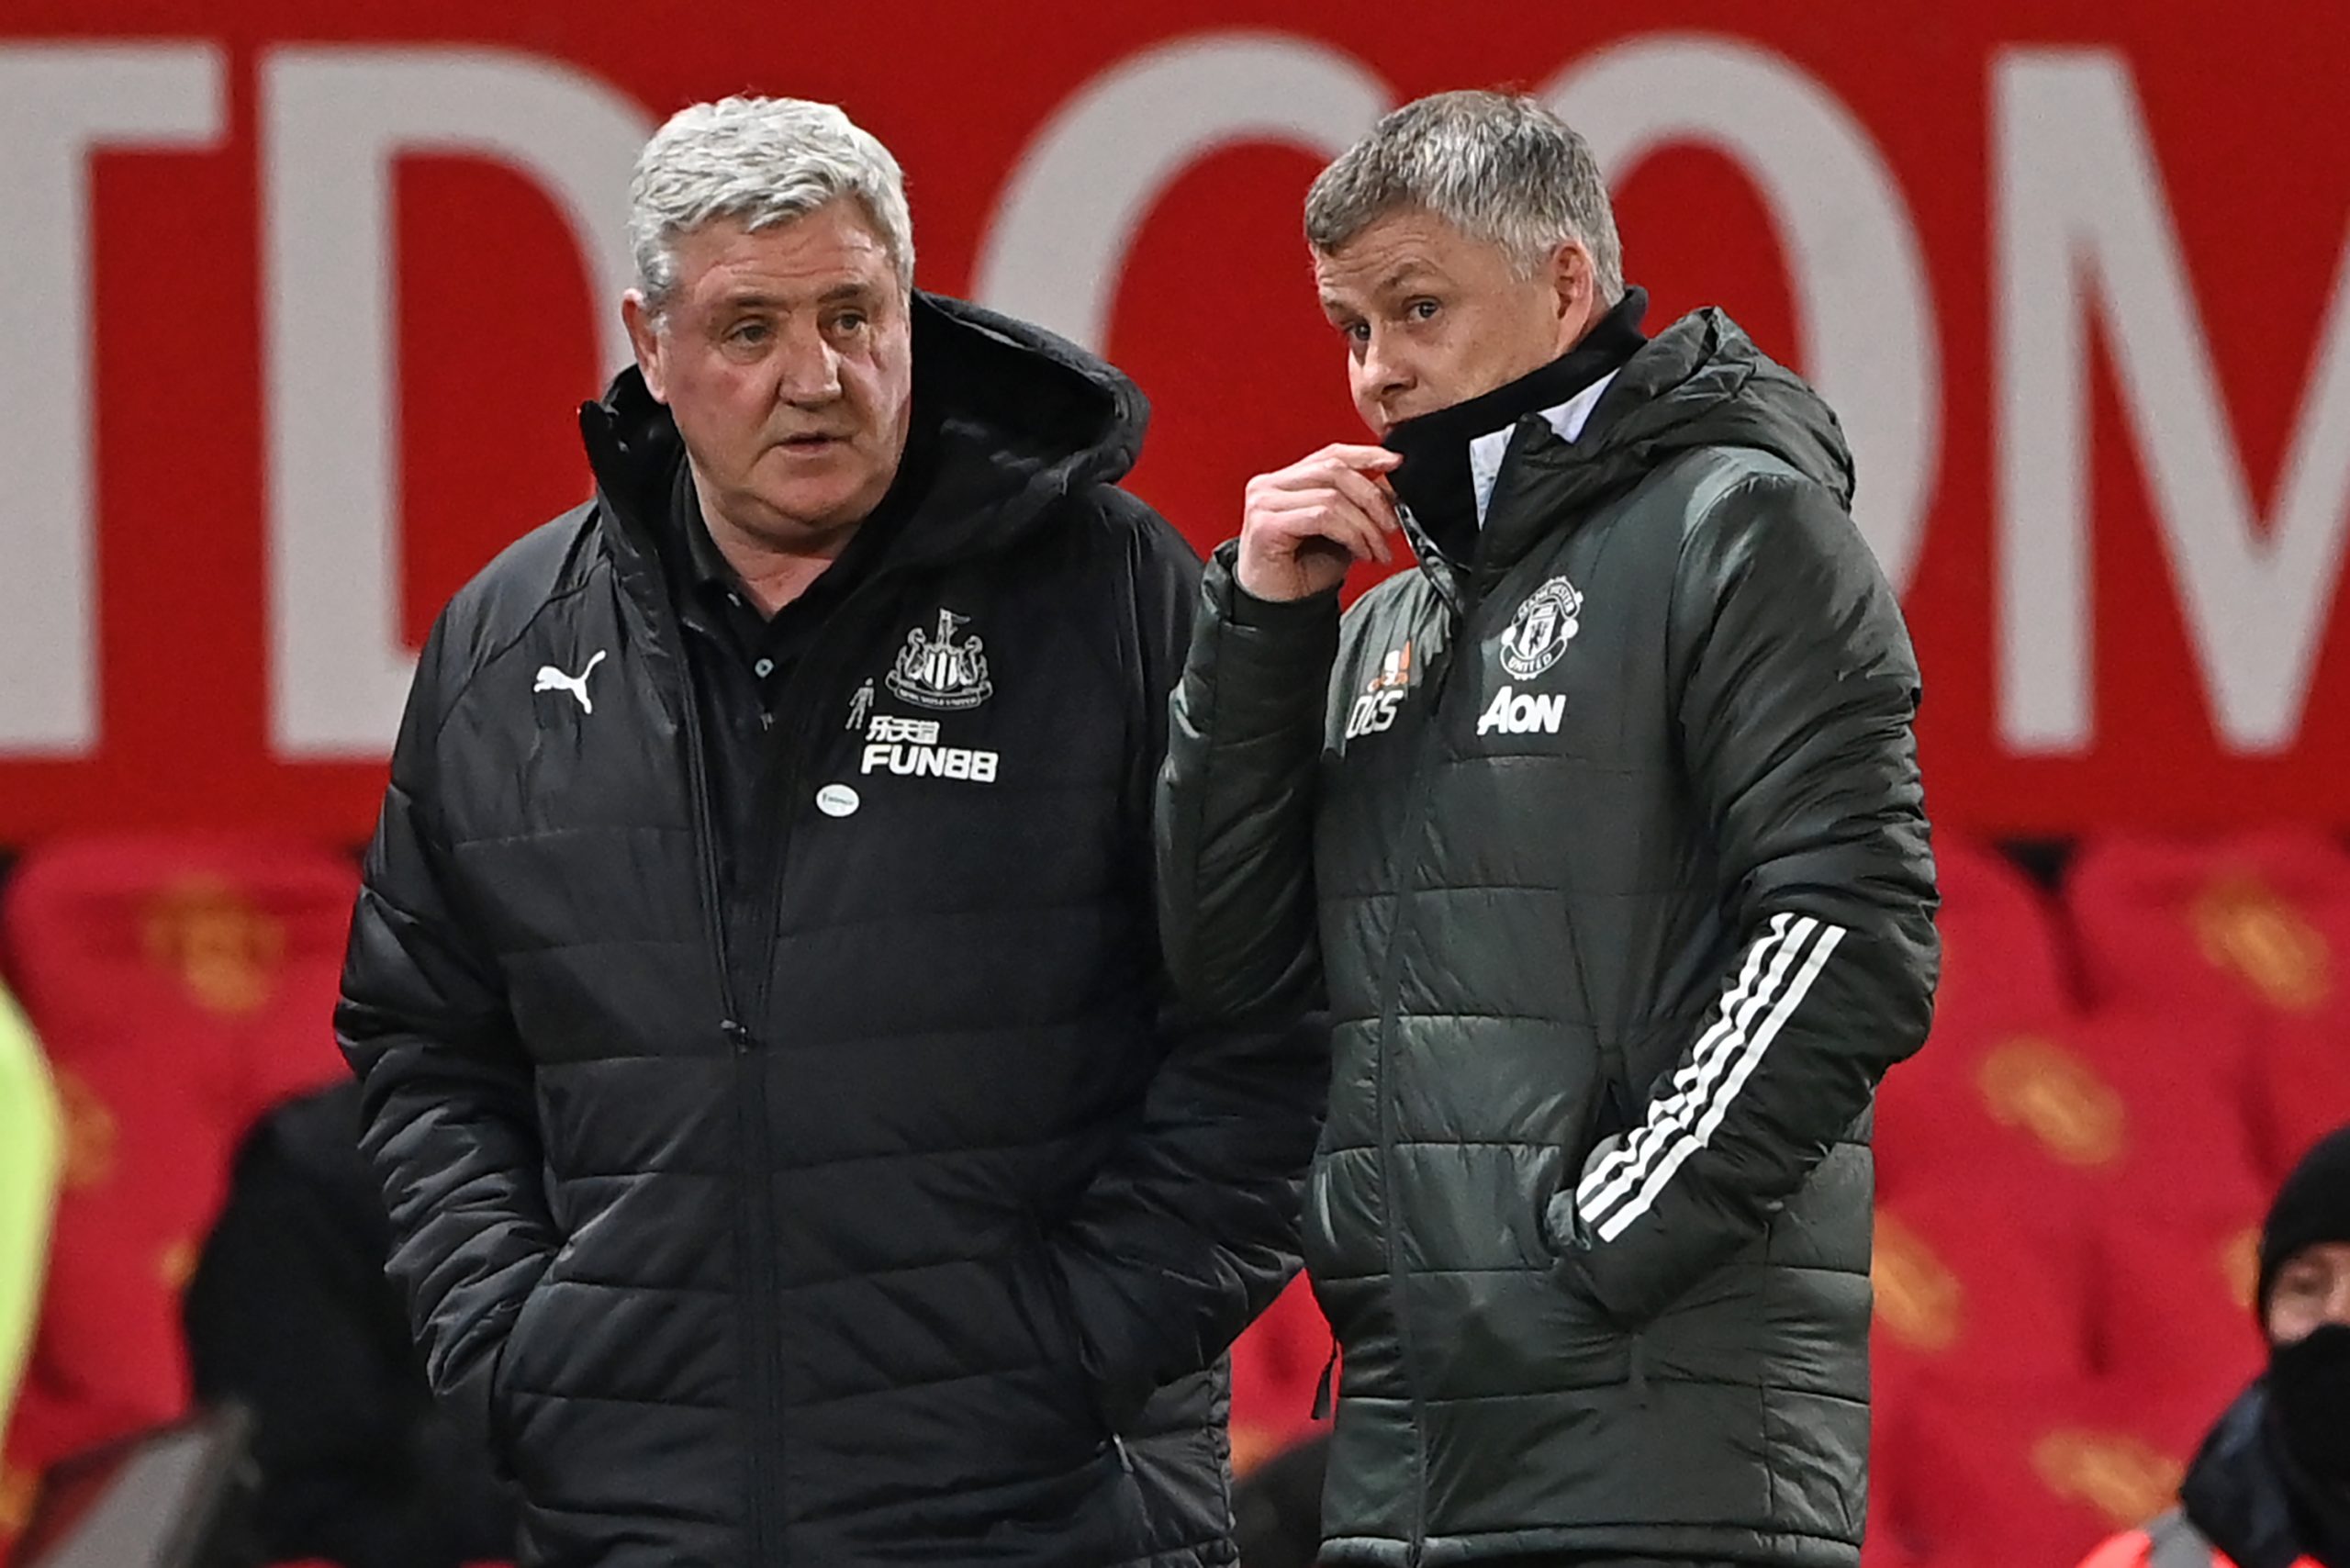 Newcastle United manager was not happy with the reporter asking him why he was smiling with Manchester United manager Ole Gunnar Solskjaer.